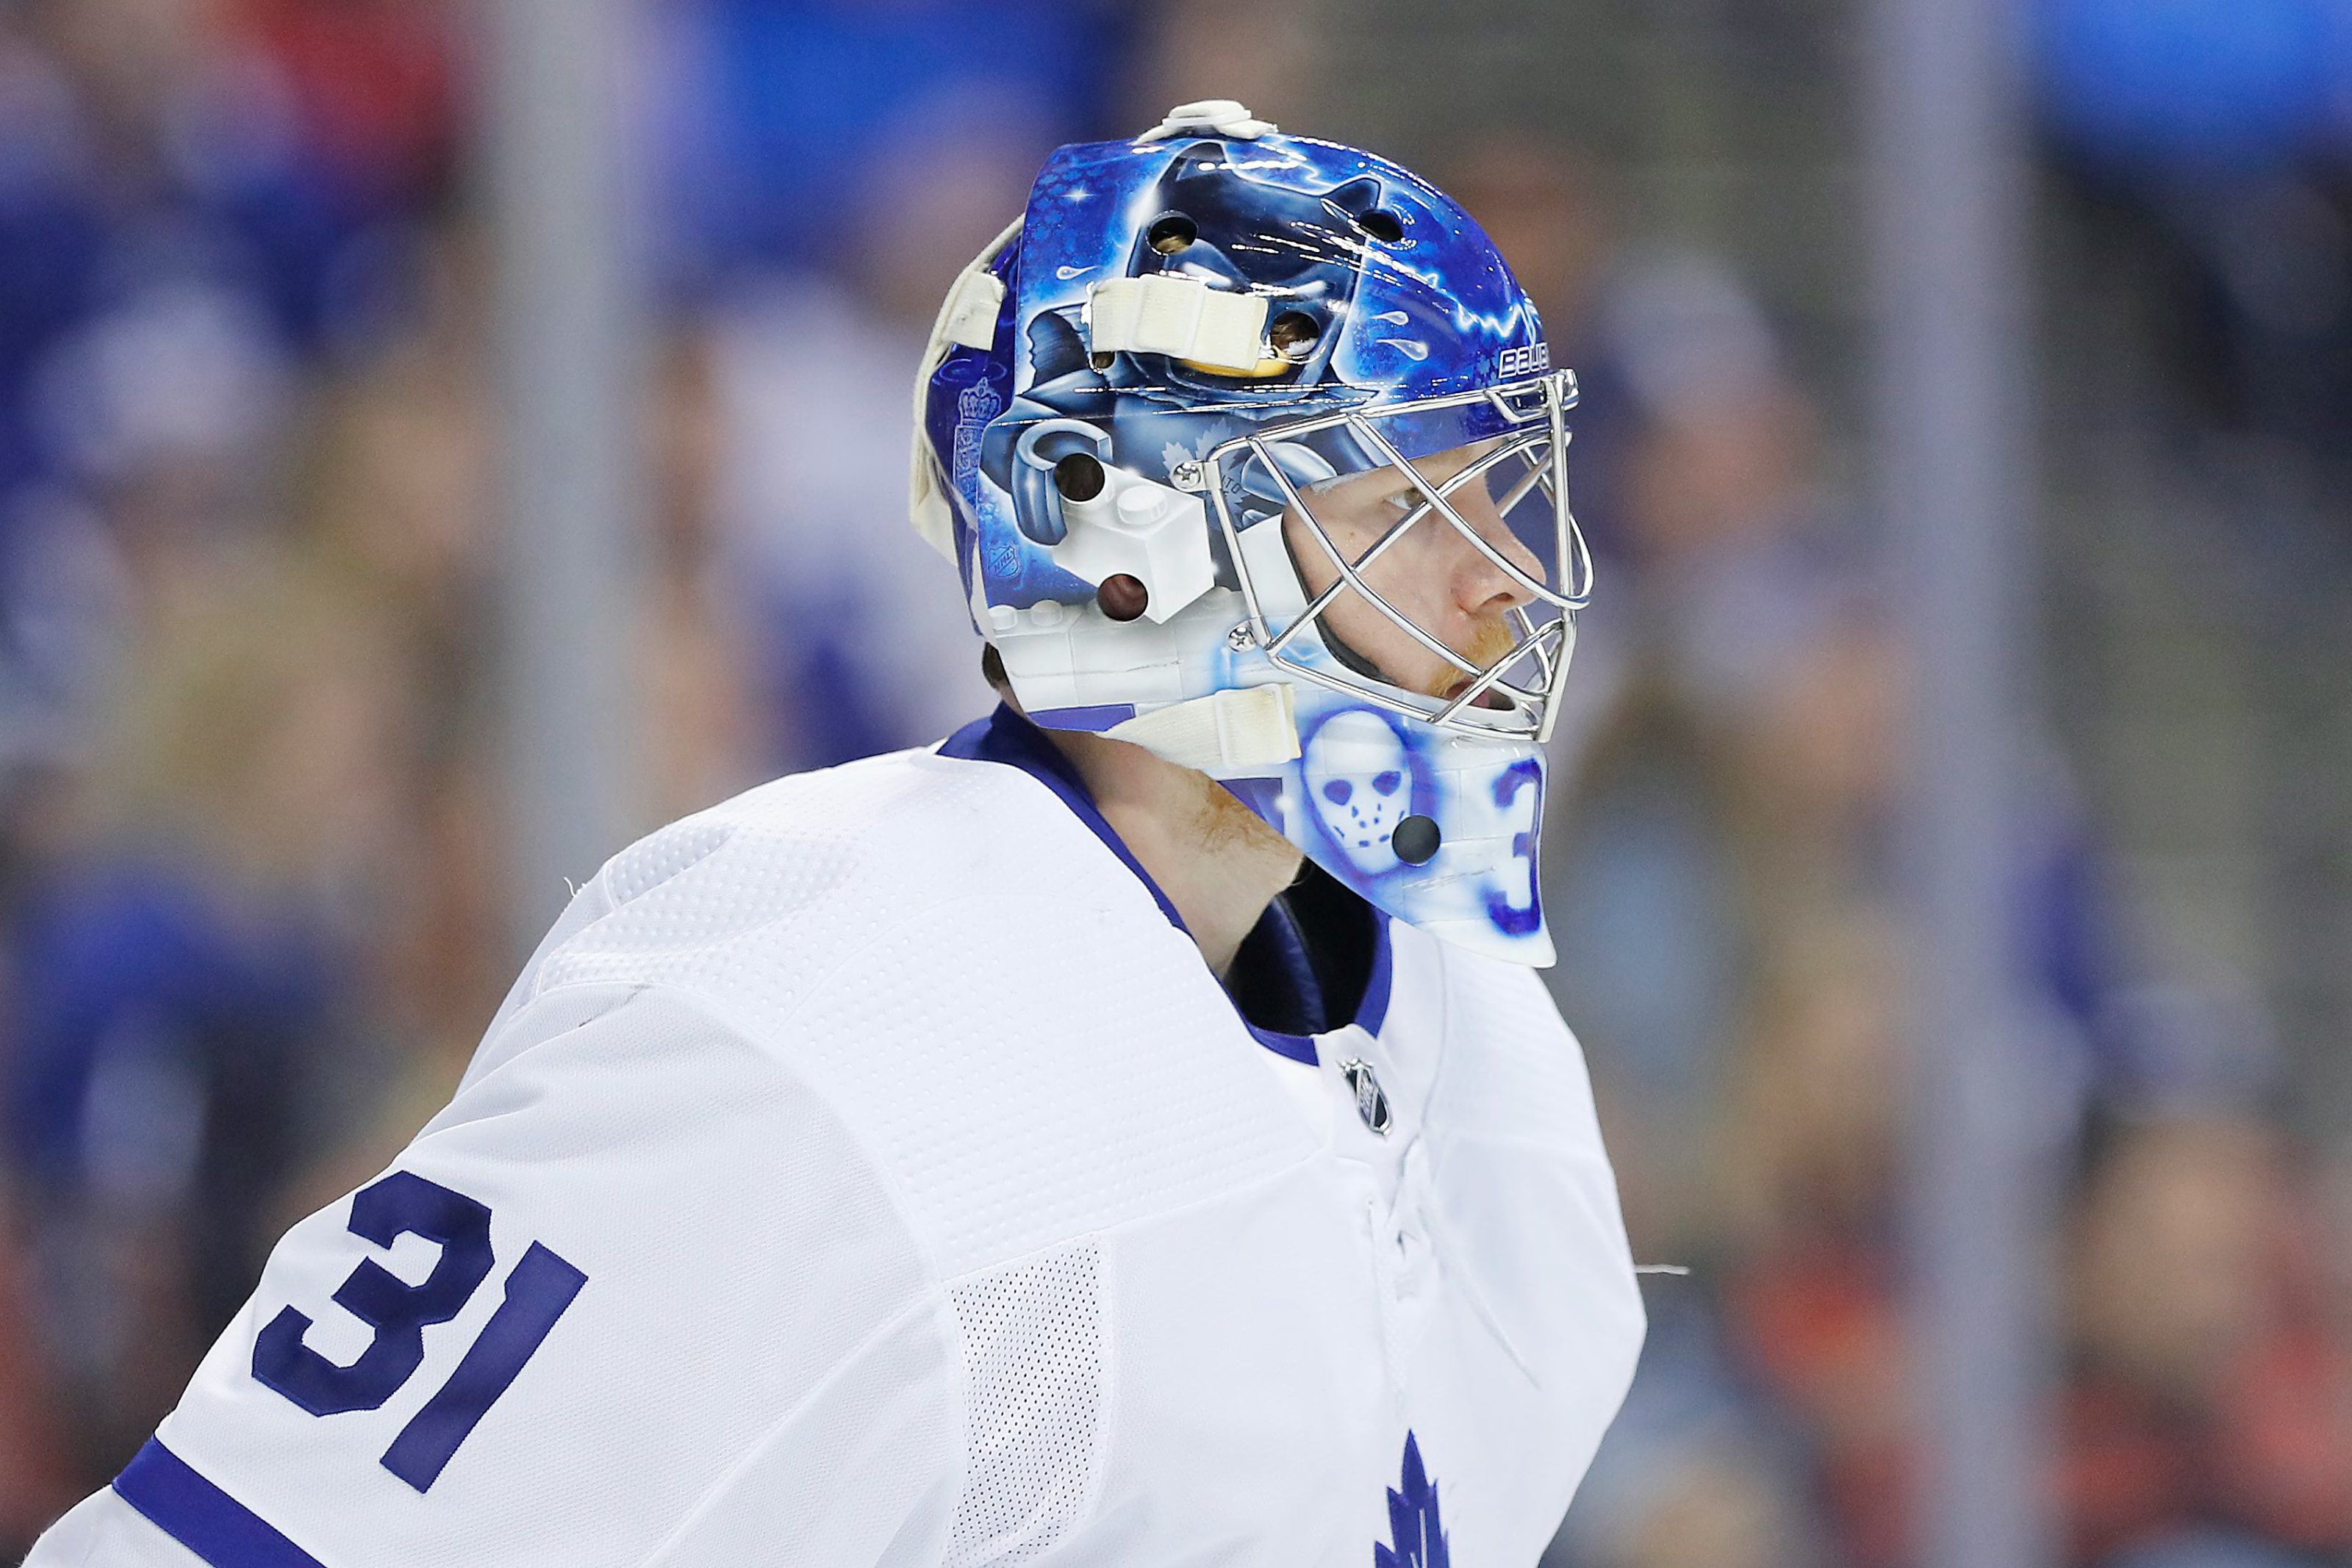 Top 5 Best Looking Toronto Maple Leafs Goalie Masks of All-Time